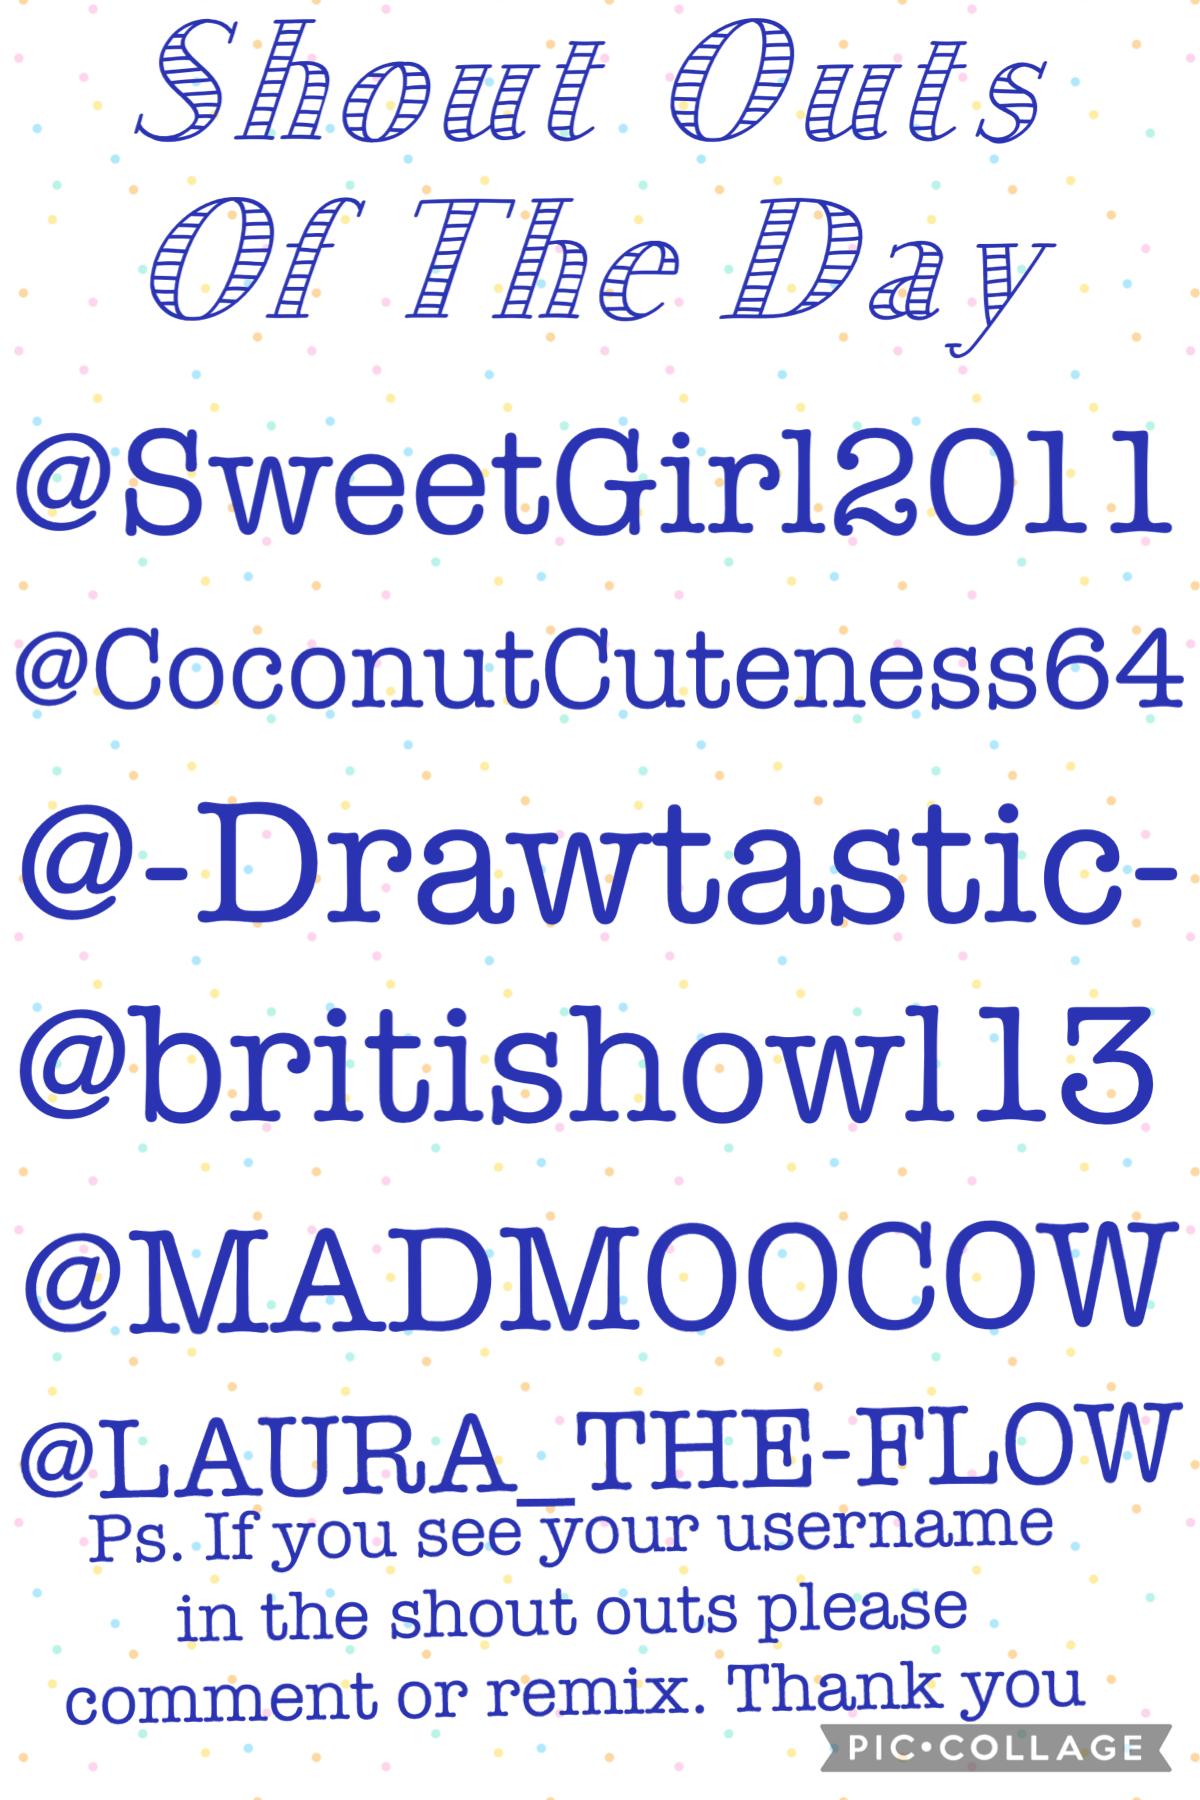 Shout outs of the day #2
If you see your username please comment or remix. Thank You.